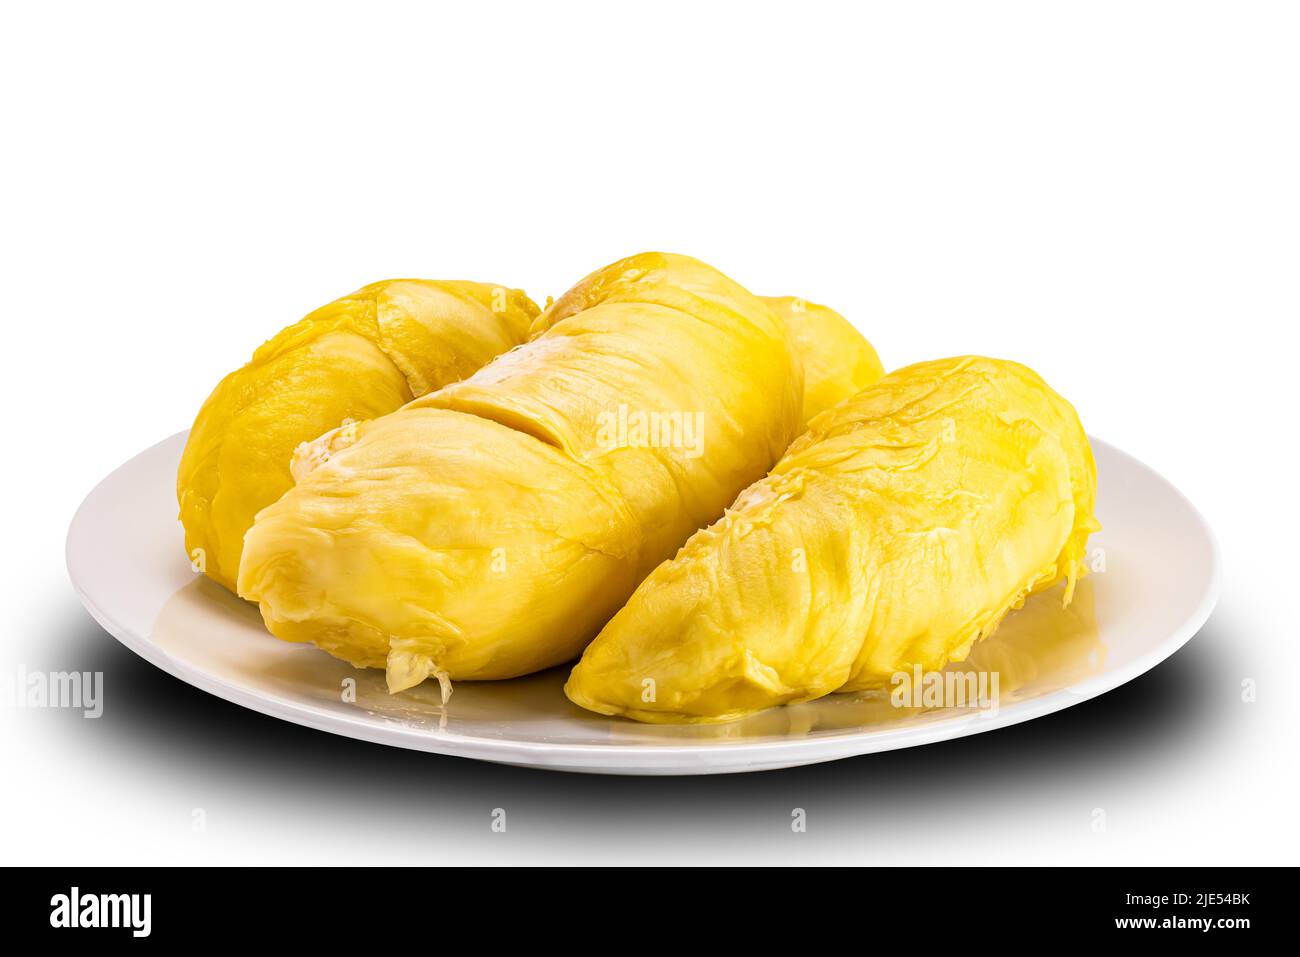 Closeup view of fresh durian palps in white ceramic plate isolated on white background with clipping path. Stock Photo